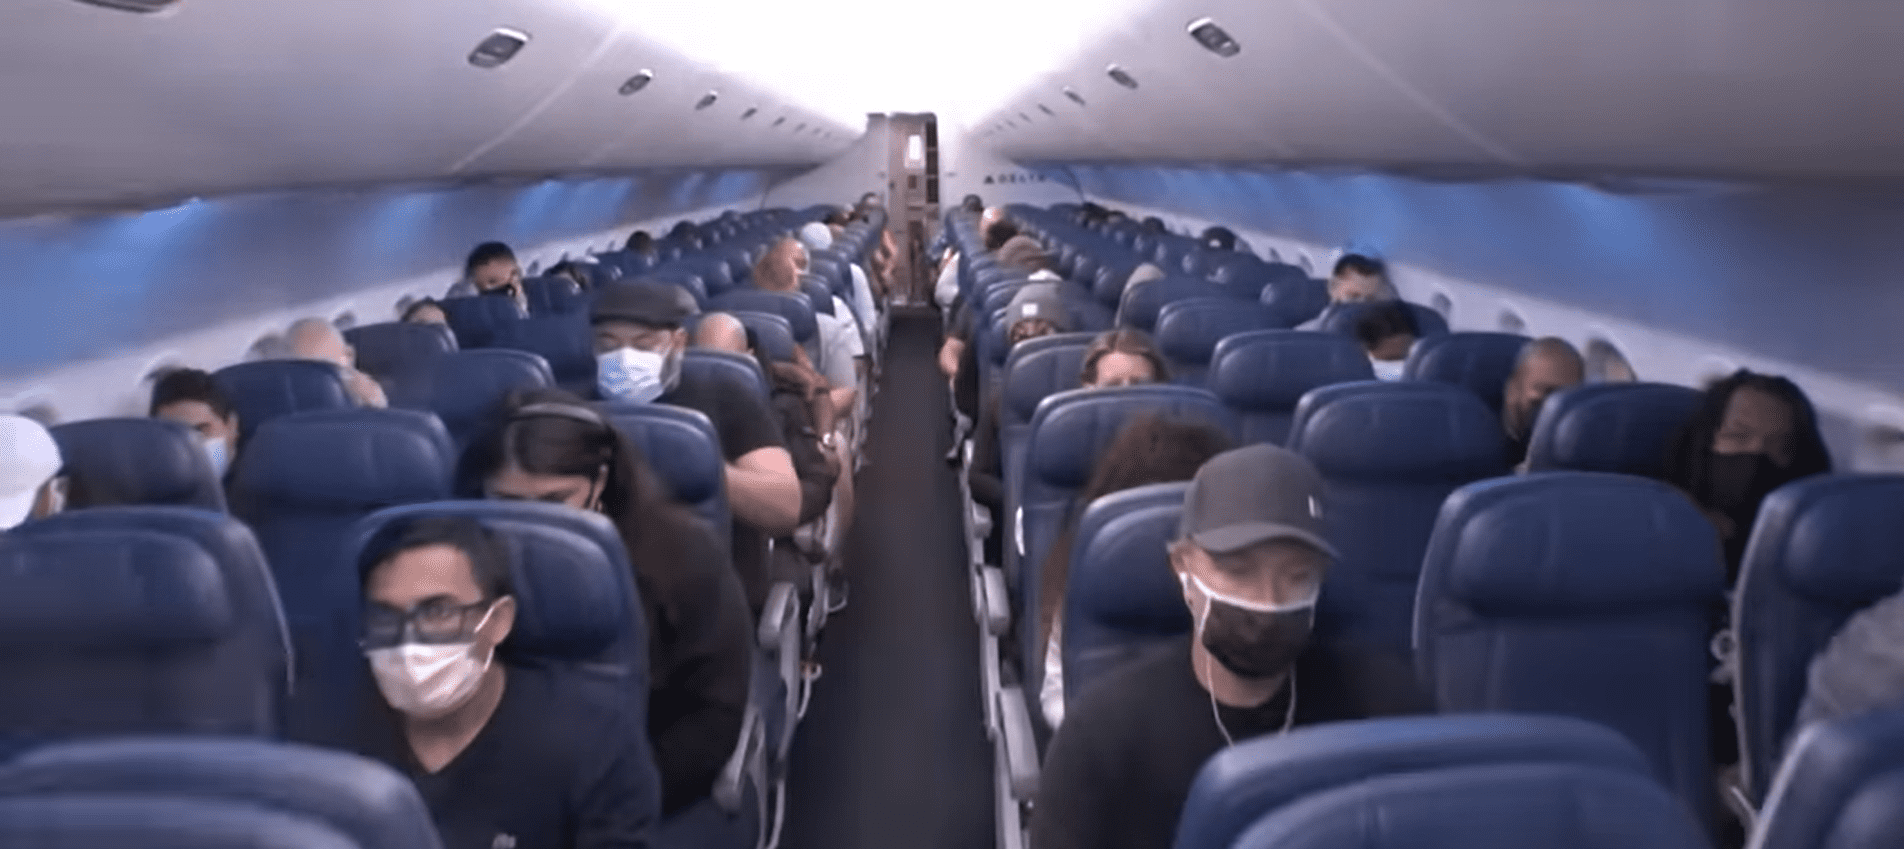 Passengers sitting on an airplane. | Source: youtube.com/Inside Edition